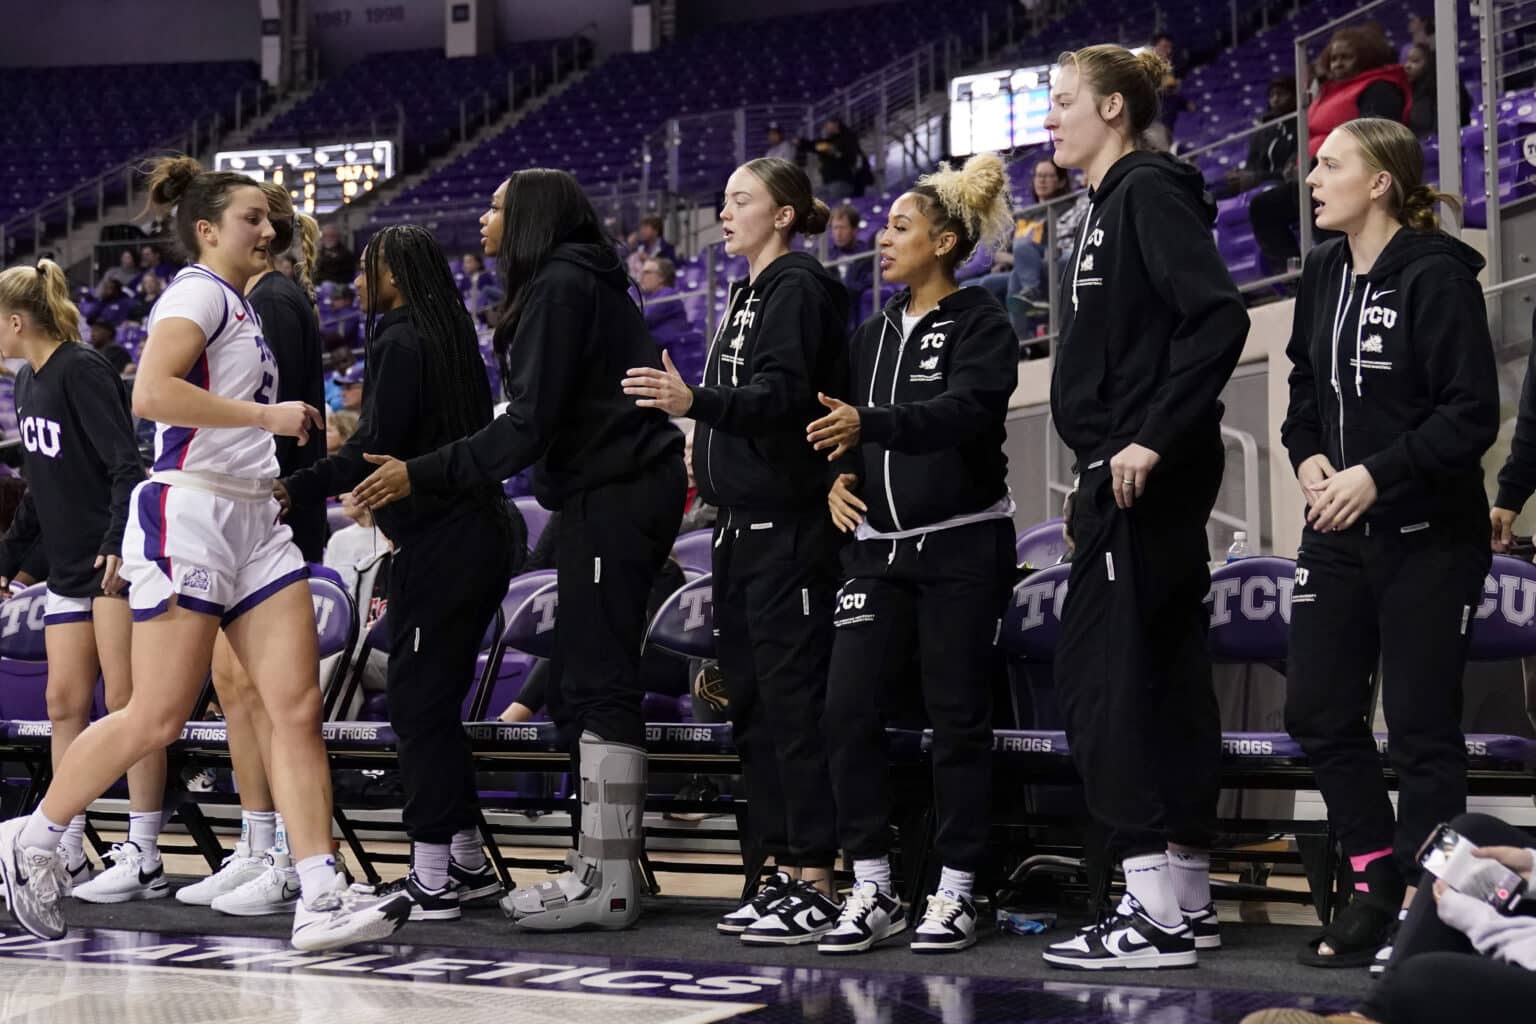 TCU women go from schoolrecord 140 start and AP ranking to forfeits